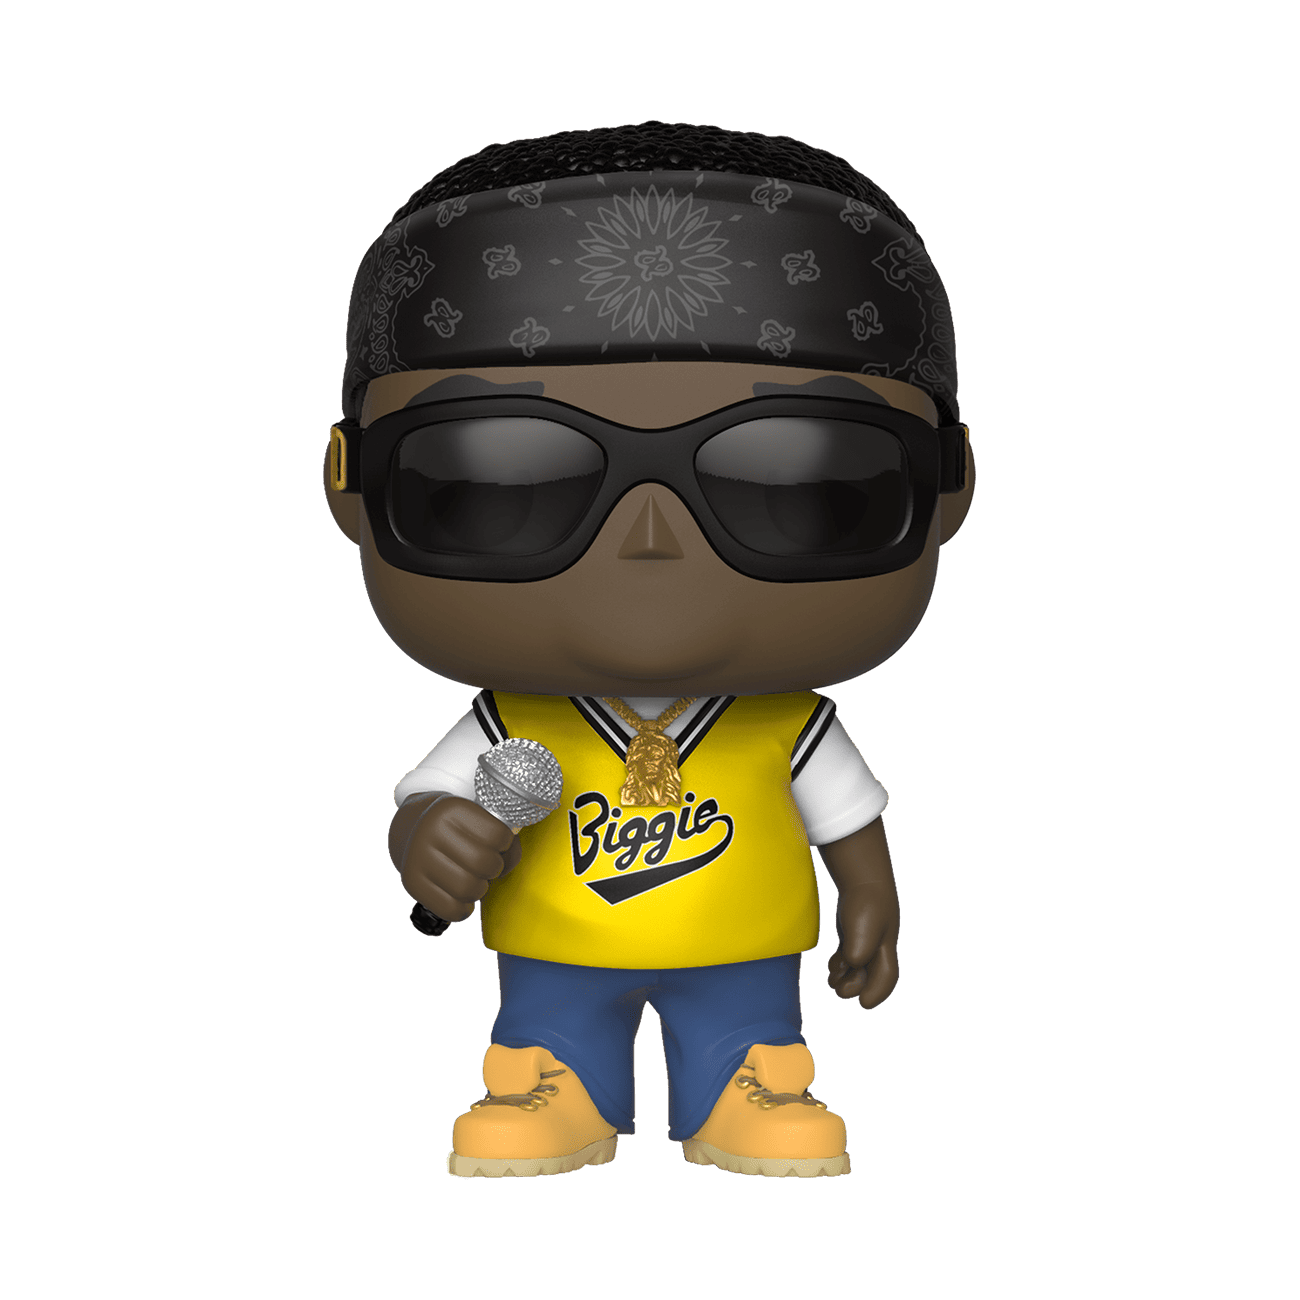 Pop! Notorious B.I.G. with Jersey at Funko.